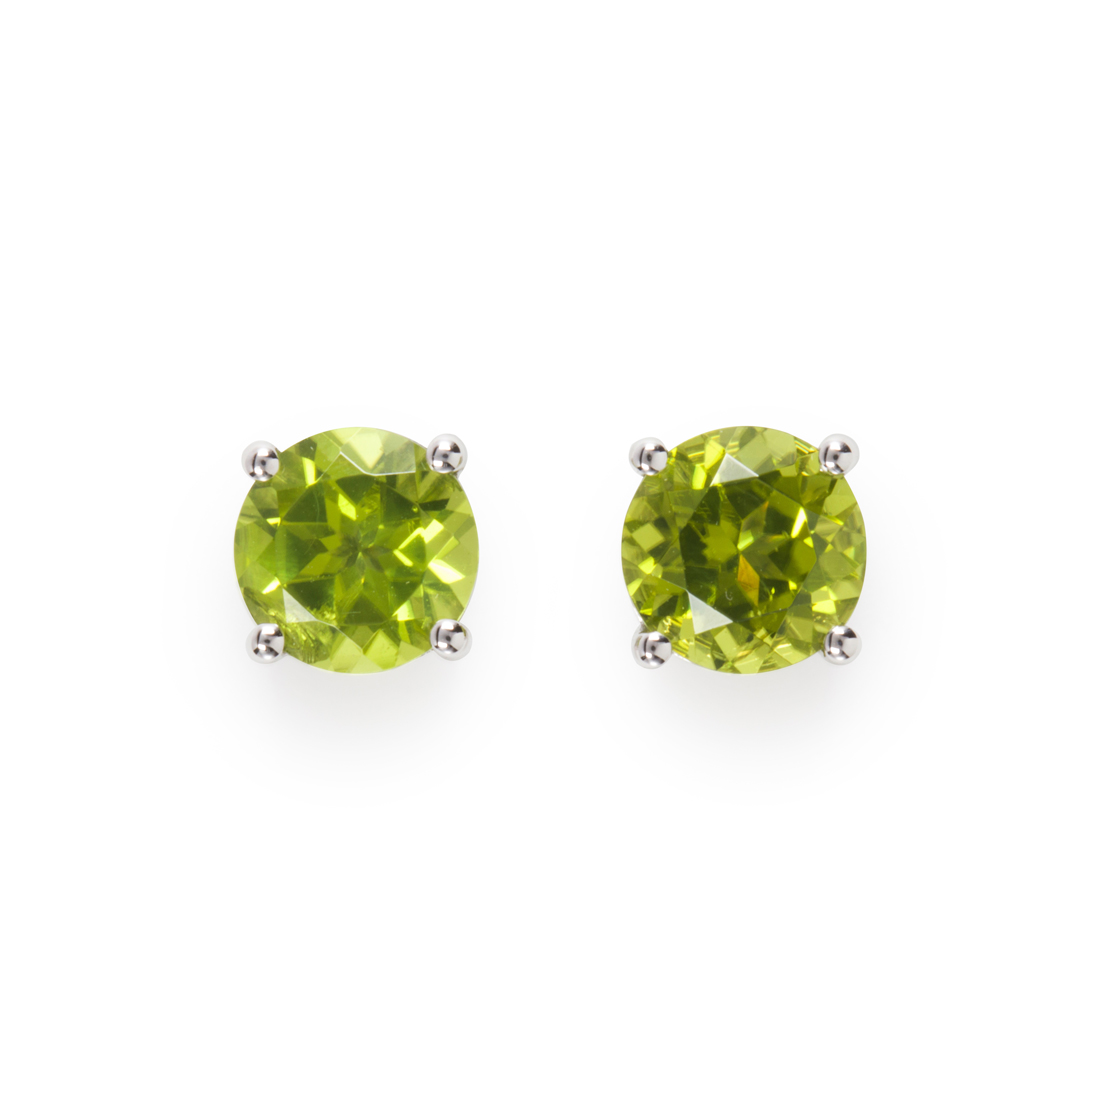 A PAIR OF PERIDOT AND FOURTEEN 3a270b